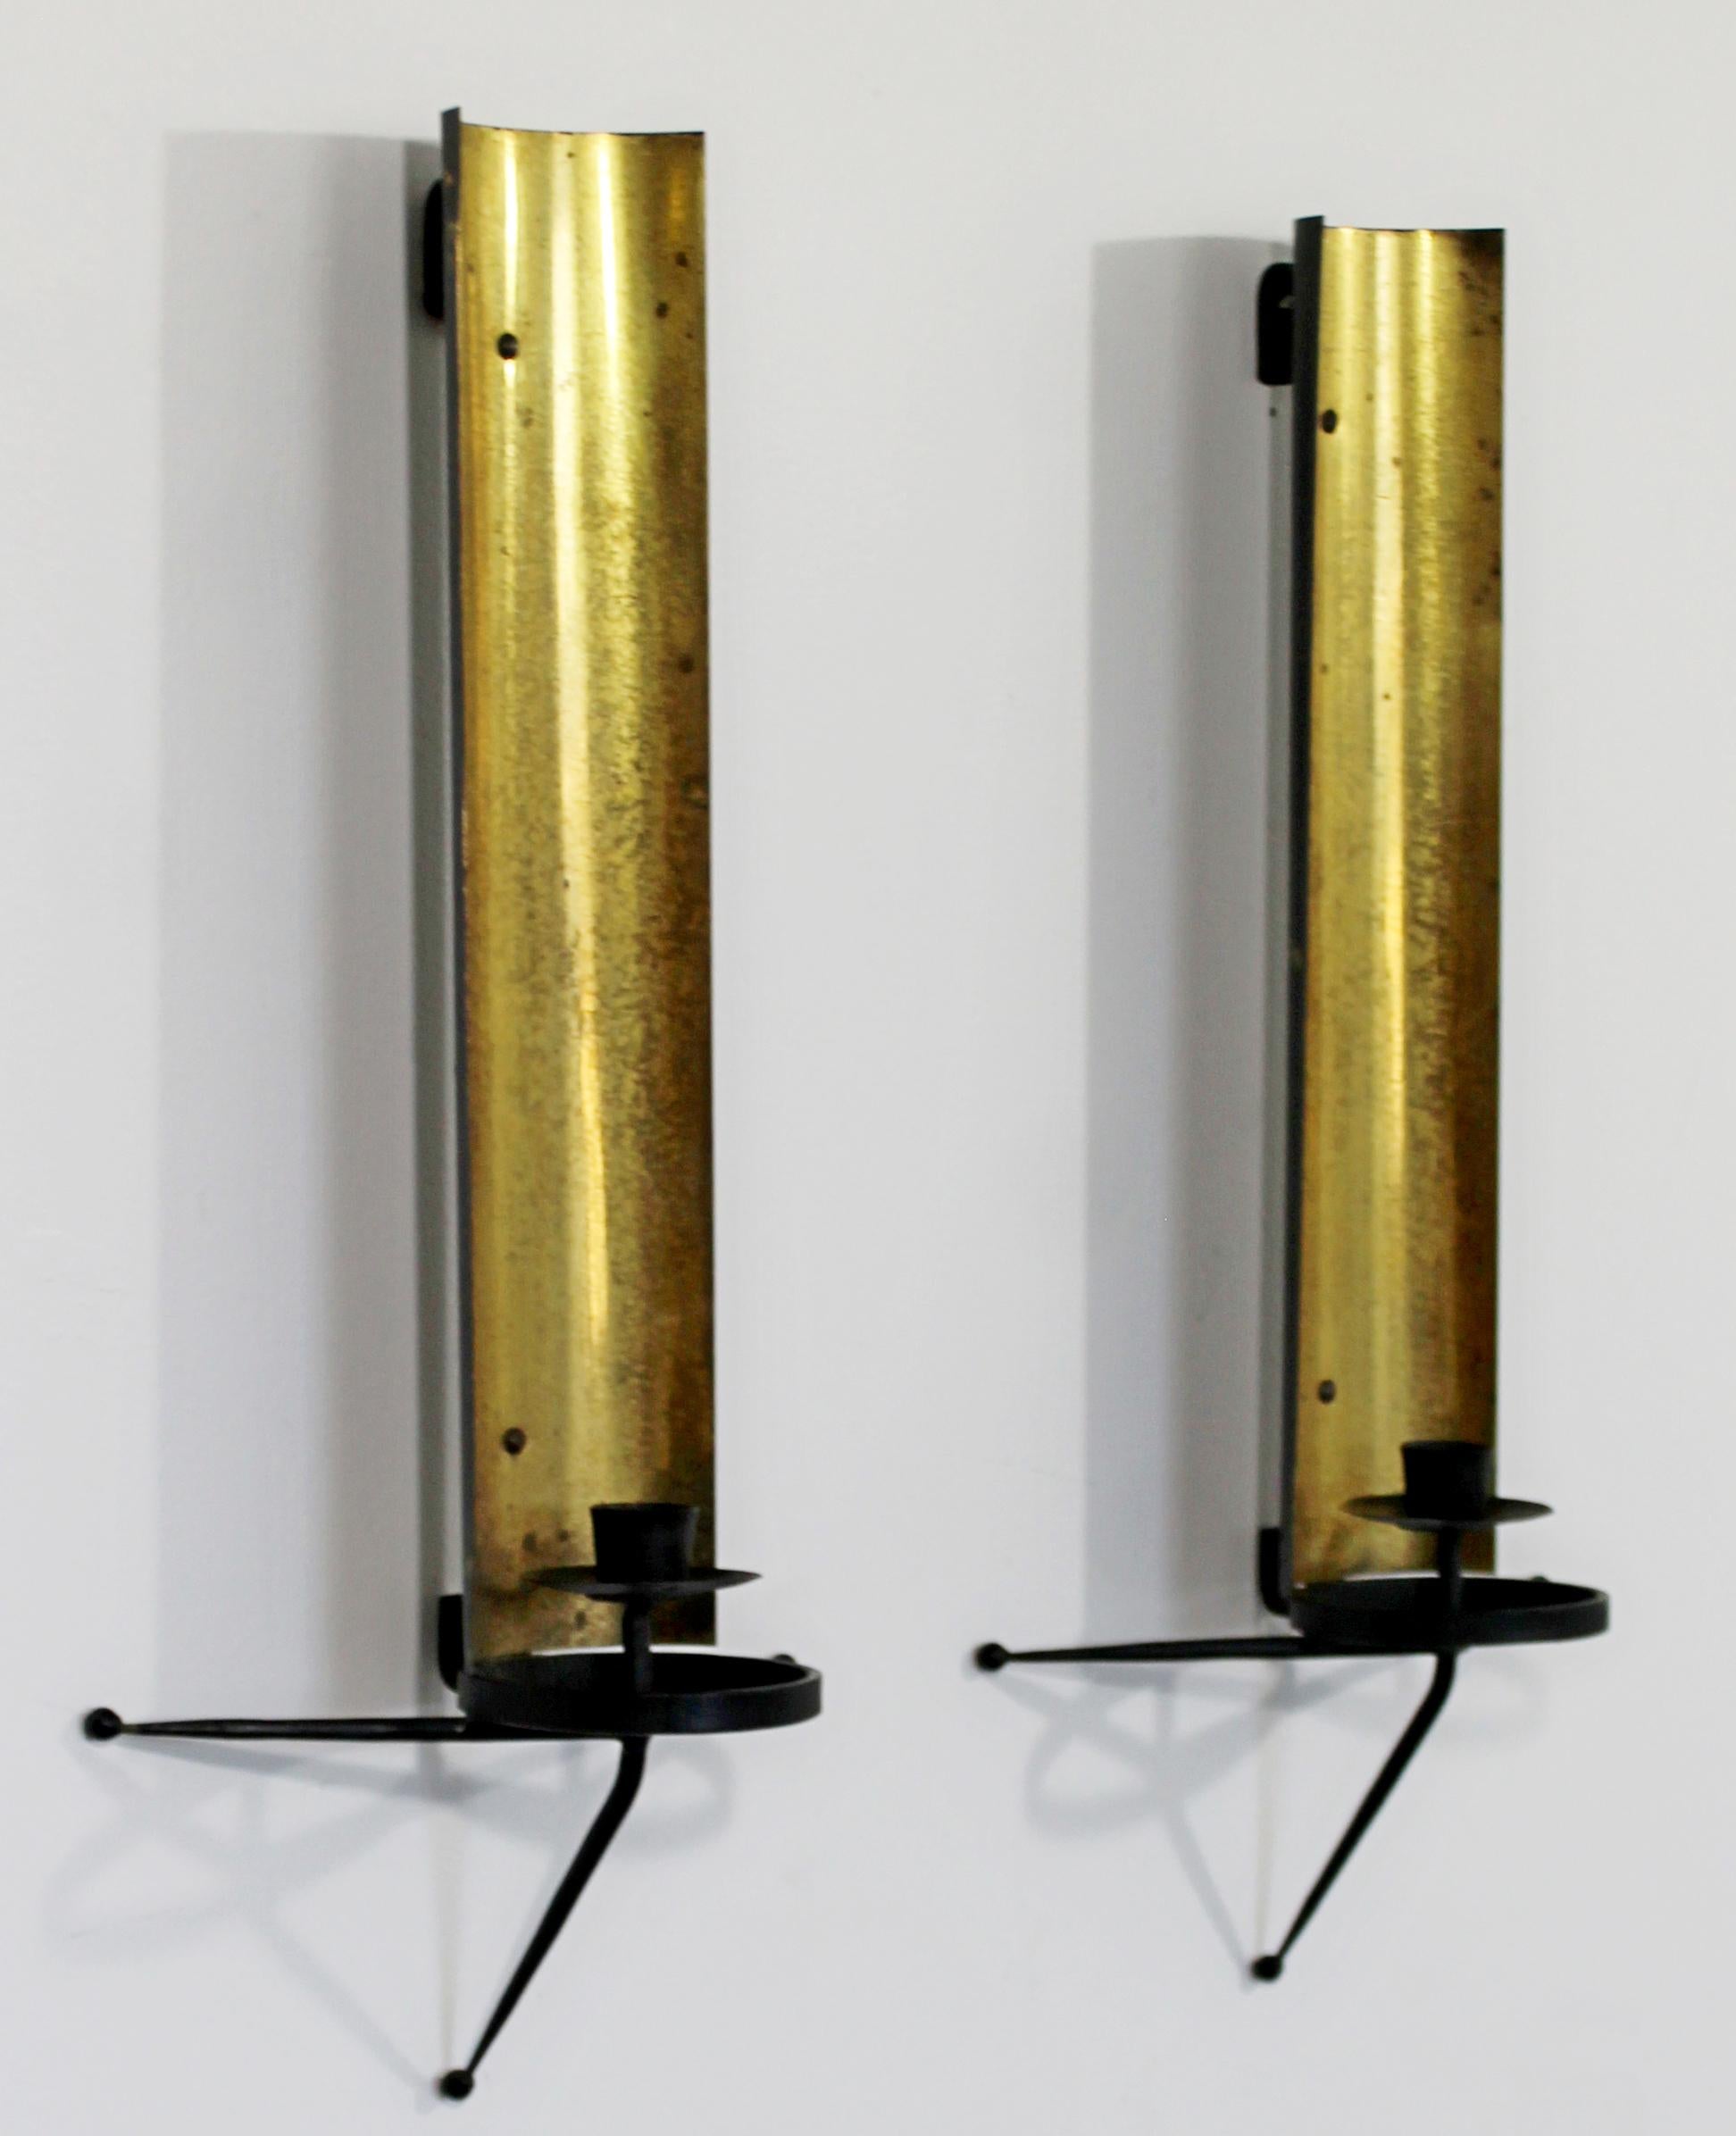 American Mid-Century Modern Pair of Tony Paul Brass and Black Metal Wall Sconces, 1950s